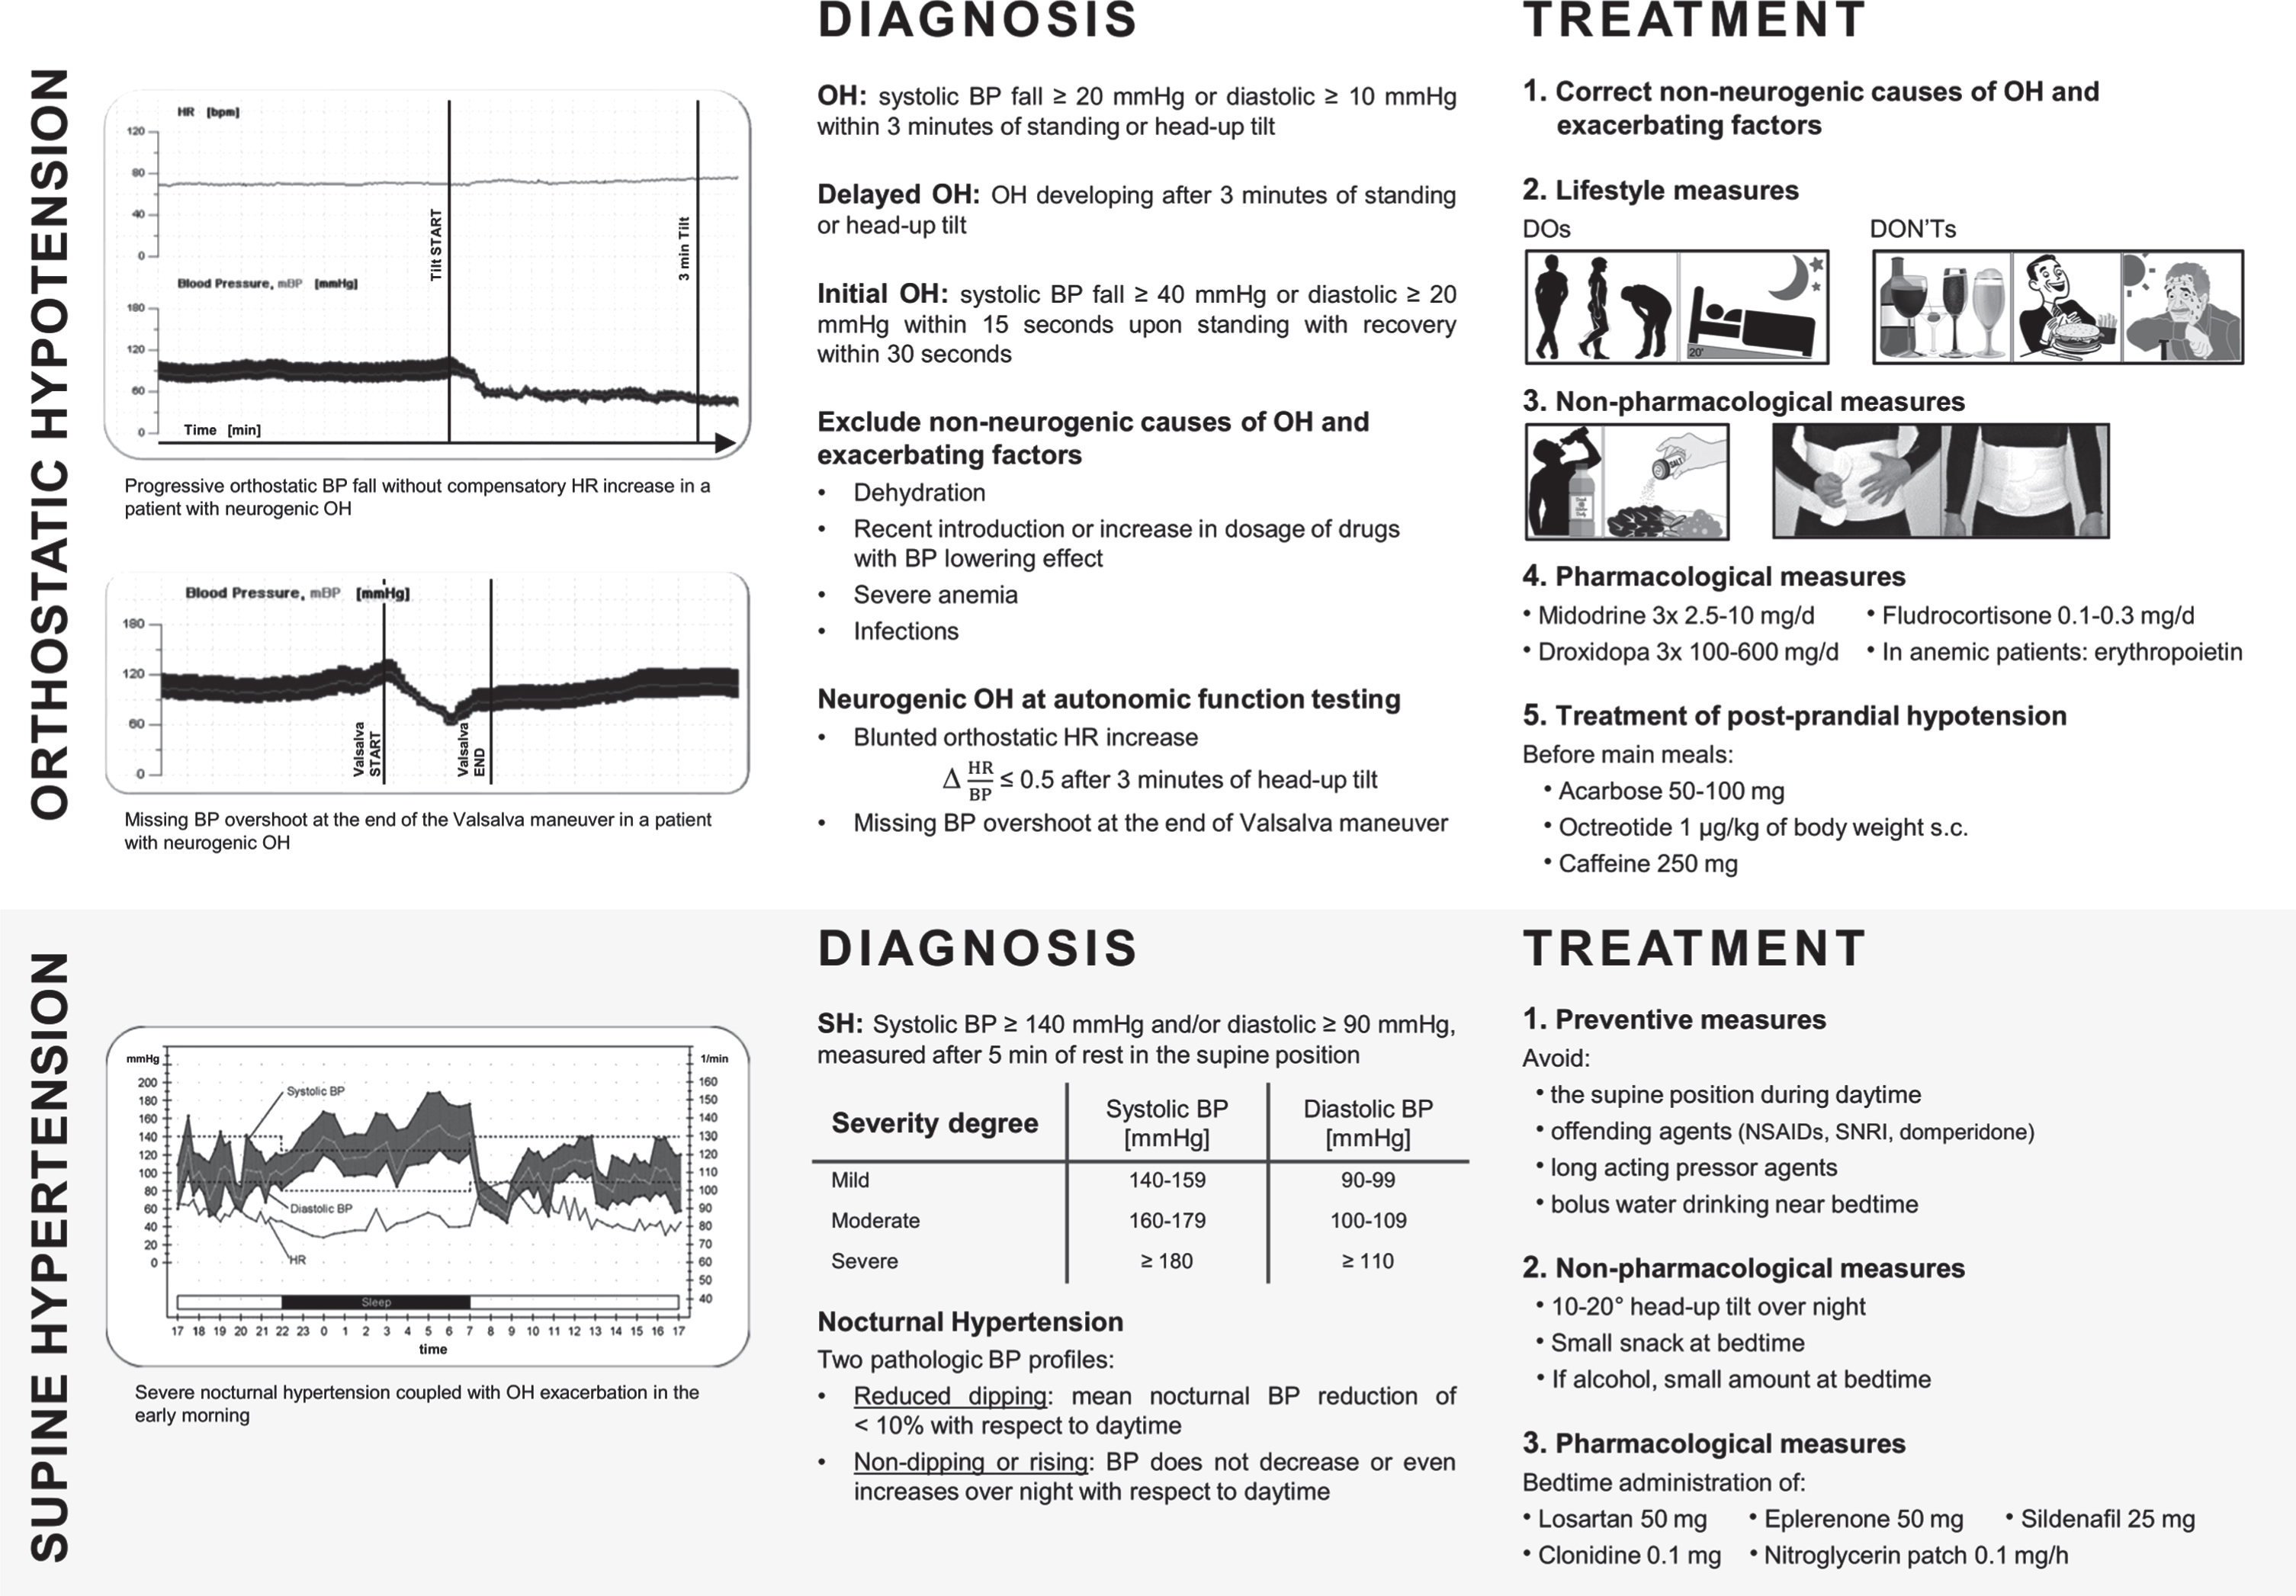 Management of orthostatic hypotension and supine hypertension in Parkinson’s disease. OH, orthostatic hypotension; BP, blood pressure; HR, heart rate; NSAIDs, non-steroidal anti-inflammatory drugs; SNRI, serotonin-noradrenaline reuptake inhibitors. Adapted from Fanciulli et al. 2014 [11] and Fanciulli et al., 2016 [37] with permission from Springer and John Wiley and Sons.